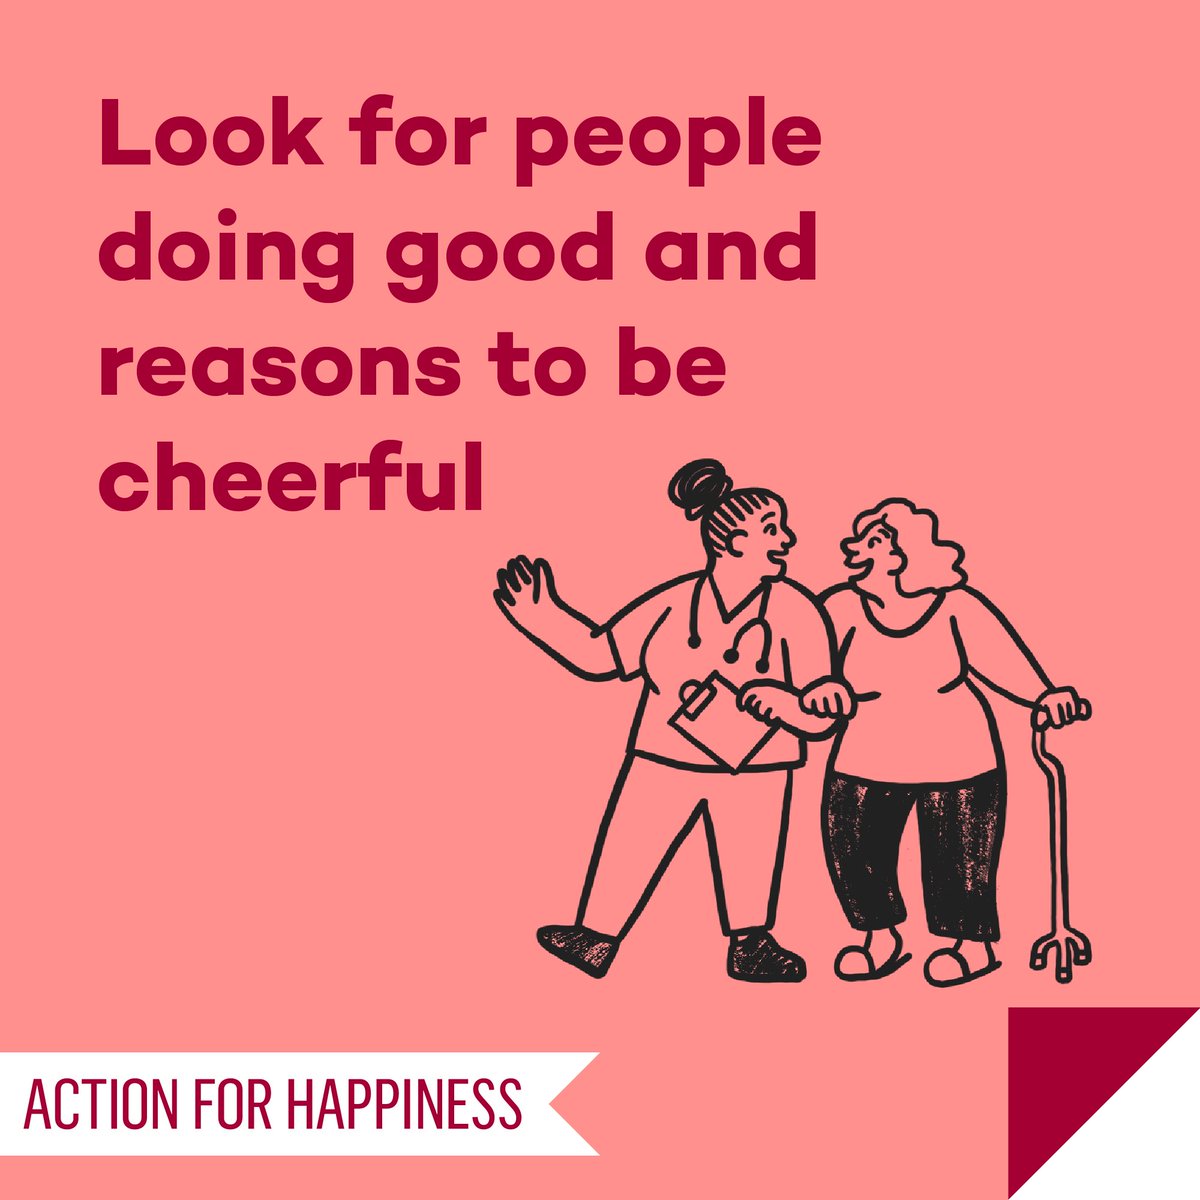 Meaningful May - Day 6: Look for people doing good and reasons to be cheerful actionforhappiness.org/meaningful-may #MeaningfulMay